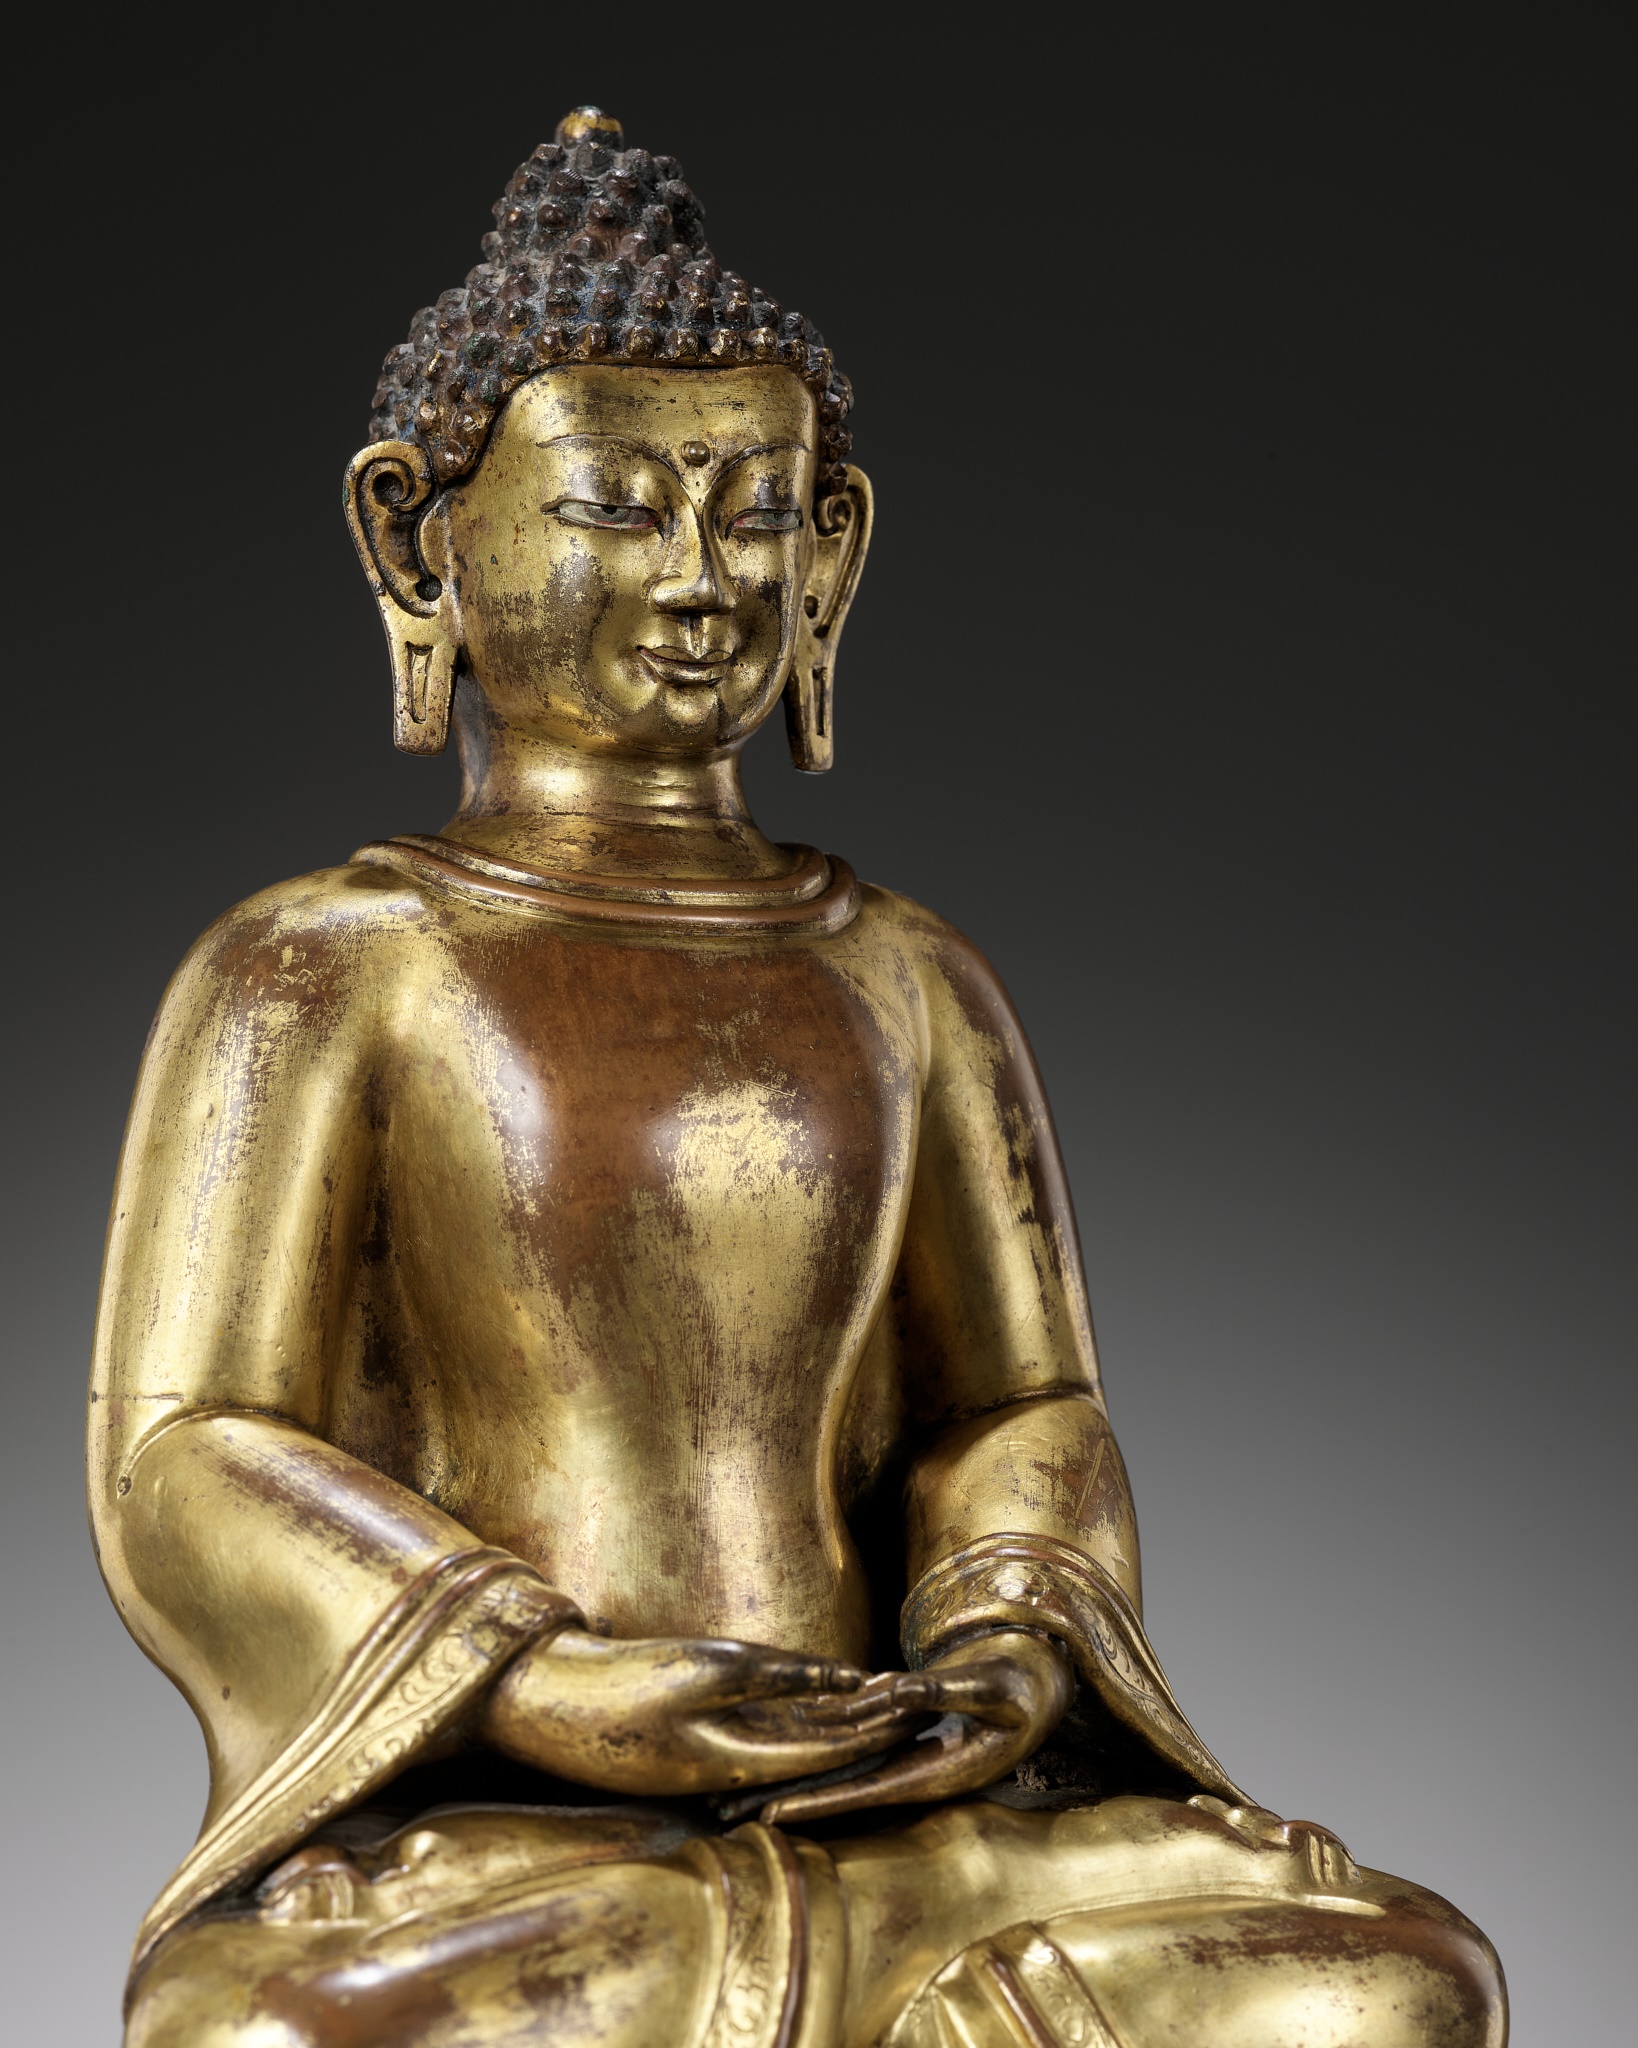 A GILT COPPER-ALLOY REPOUSSE FIGURE OF BUDDHA AMITABHA, WITH AN INSCRIPTION REFERRING TO THE SECOND